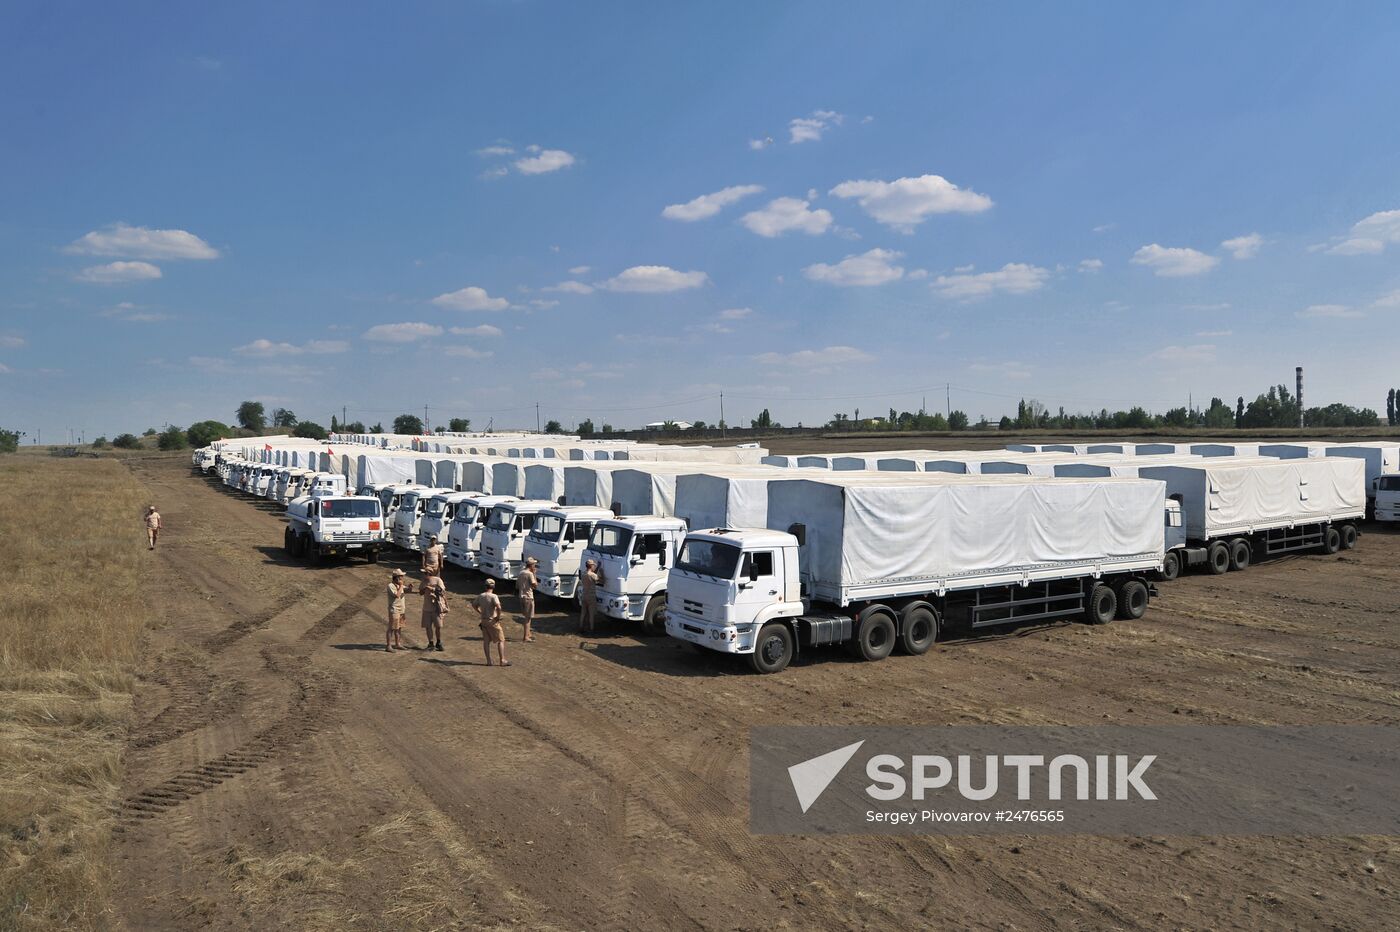 Russia's humanitarian aid convoy moves on to Ukraine